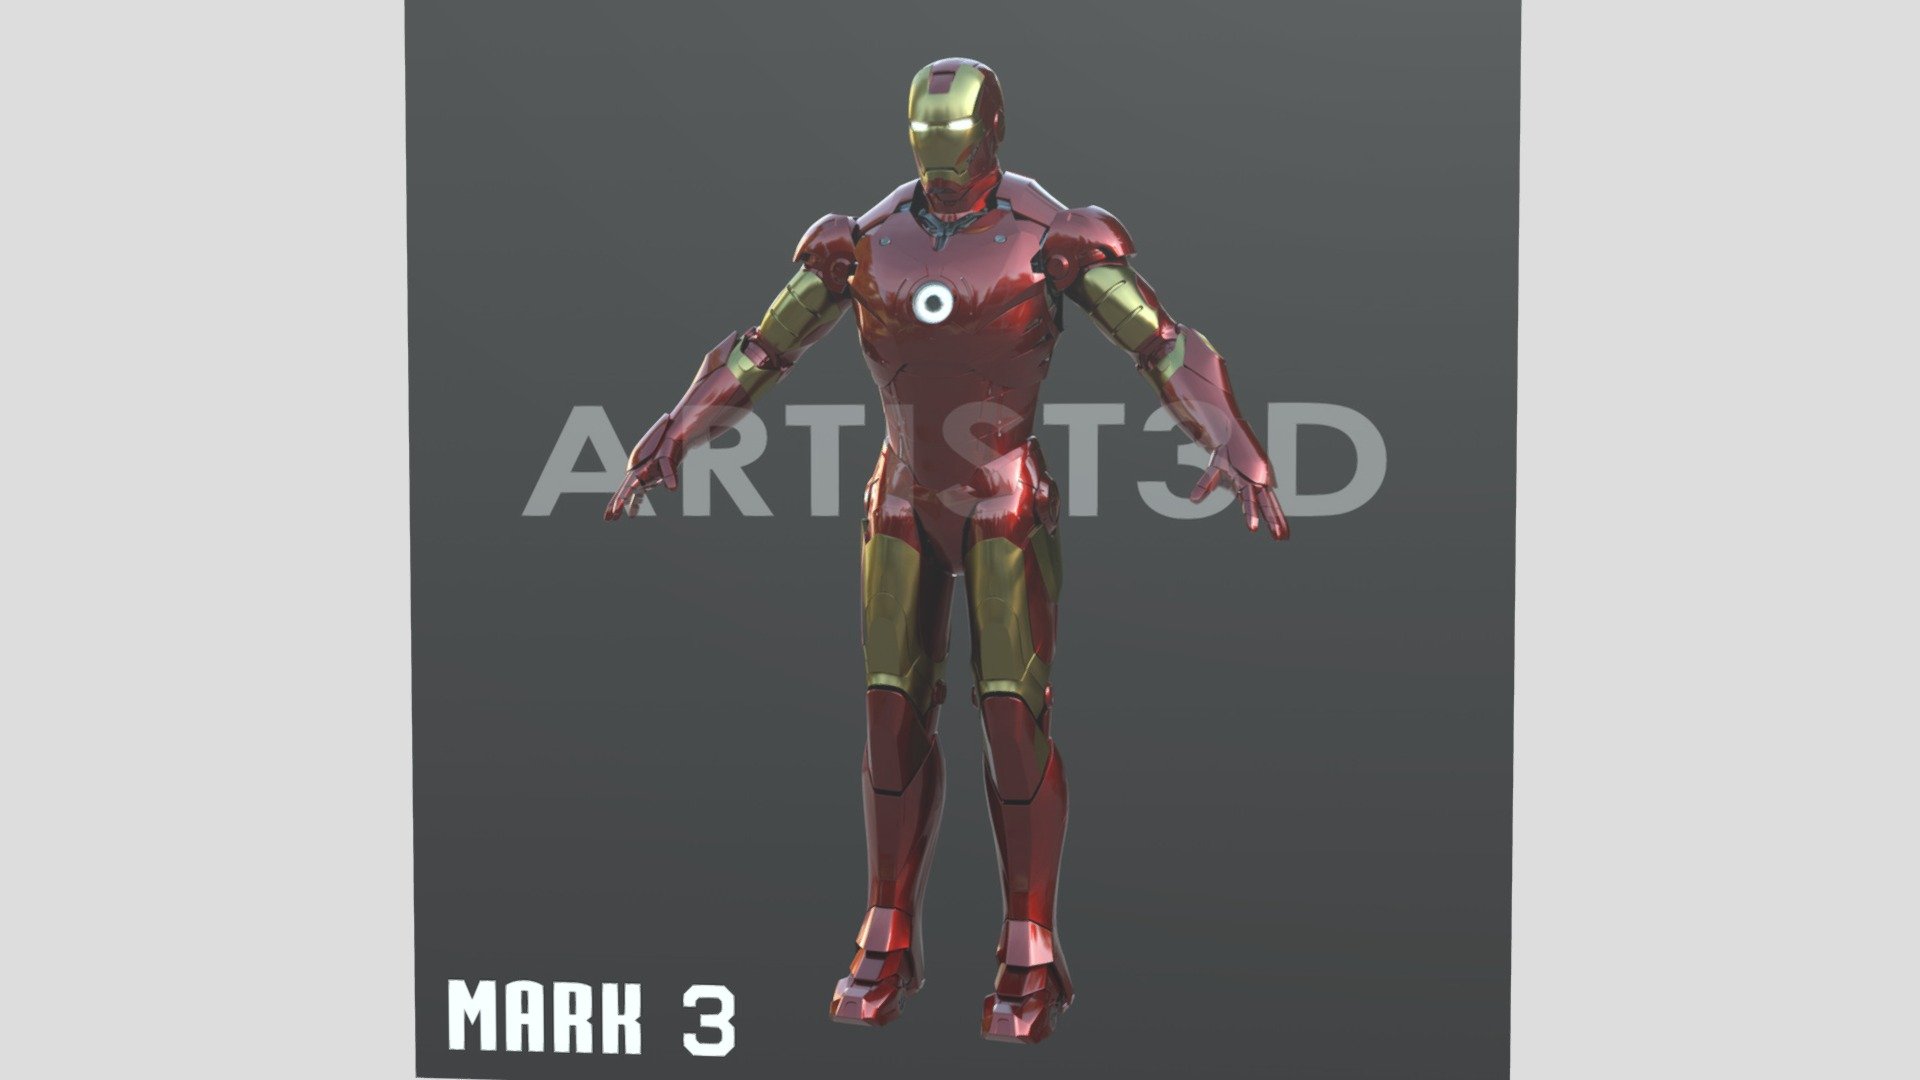 Iron Man Mark 3

Full-size armor for 3d printing (wearable). In the preview window, a “cube” with images of the Iron Man suit is provided as a demonstration. This prevents the model from being stolen from this site. At the link you can find full details on purchasing this suit.



Download link for Mark 3 armor suit:

https://www.patreon.com/posts/iron-man-mark-3-85566229

https://cults3d.com/en/3d-model/fashion/iron-man-mark-3-cosplay-full-suit
 - Iron Man Mark 3 Cosplay Full-size Suit - 3D model by ARTIST 3D (@artist_3d) 3d model